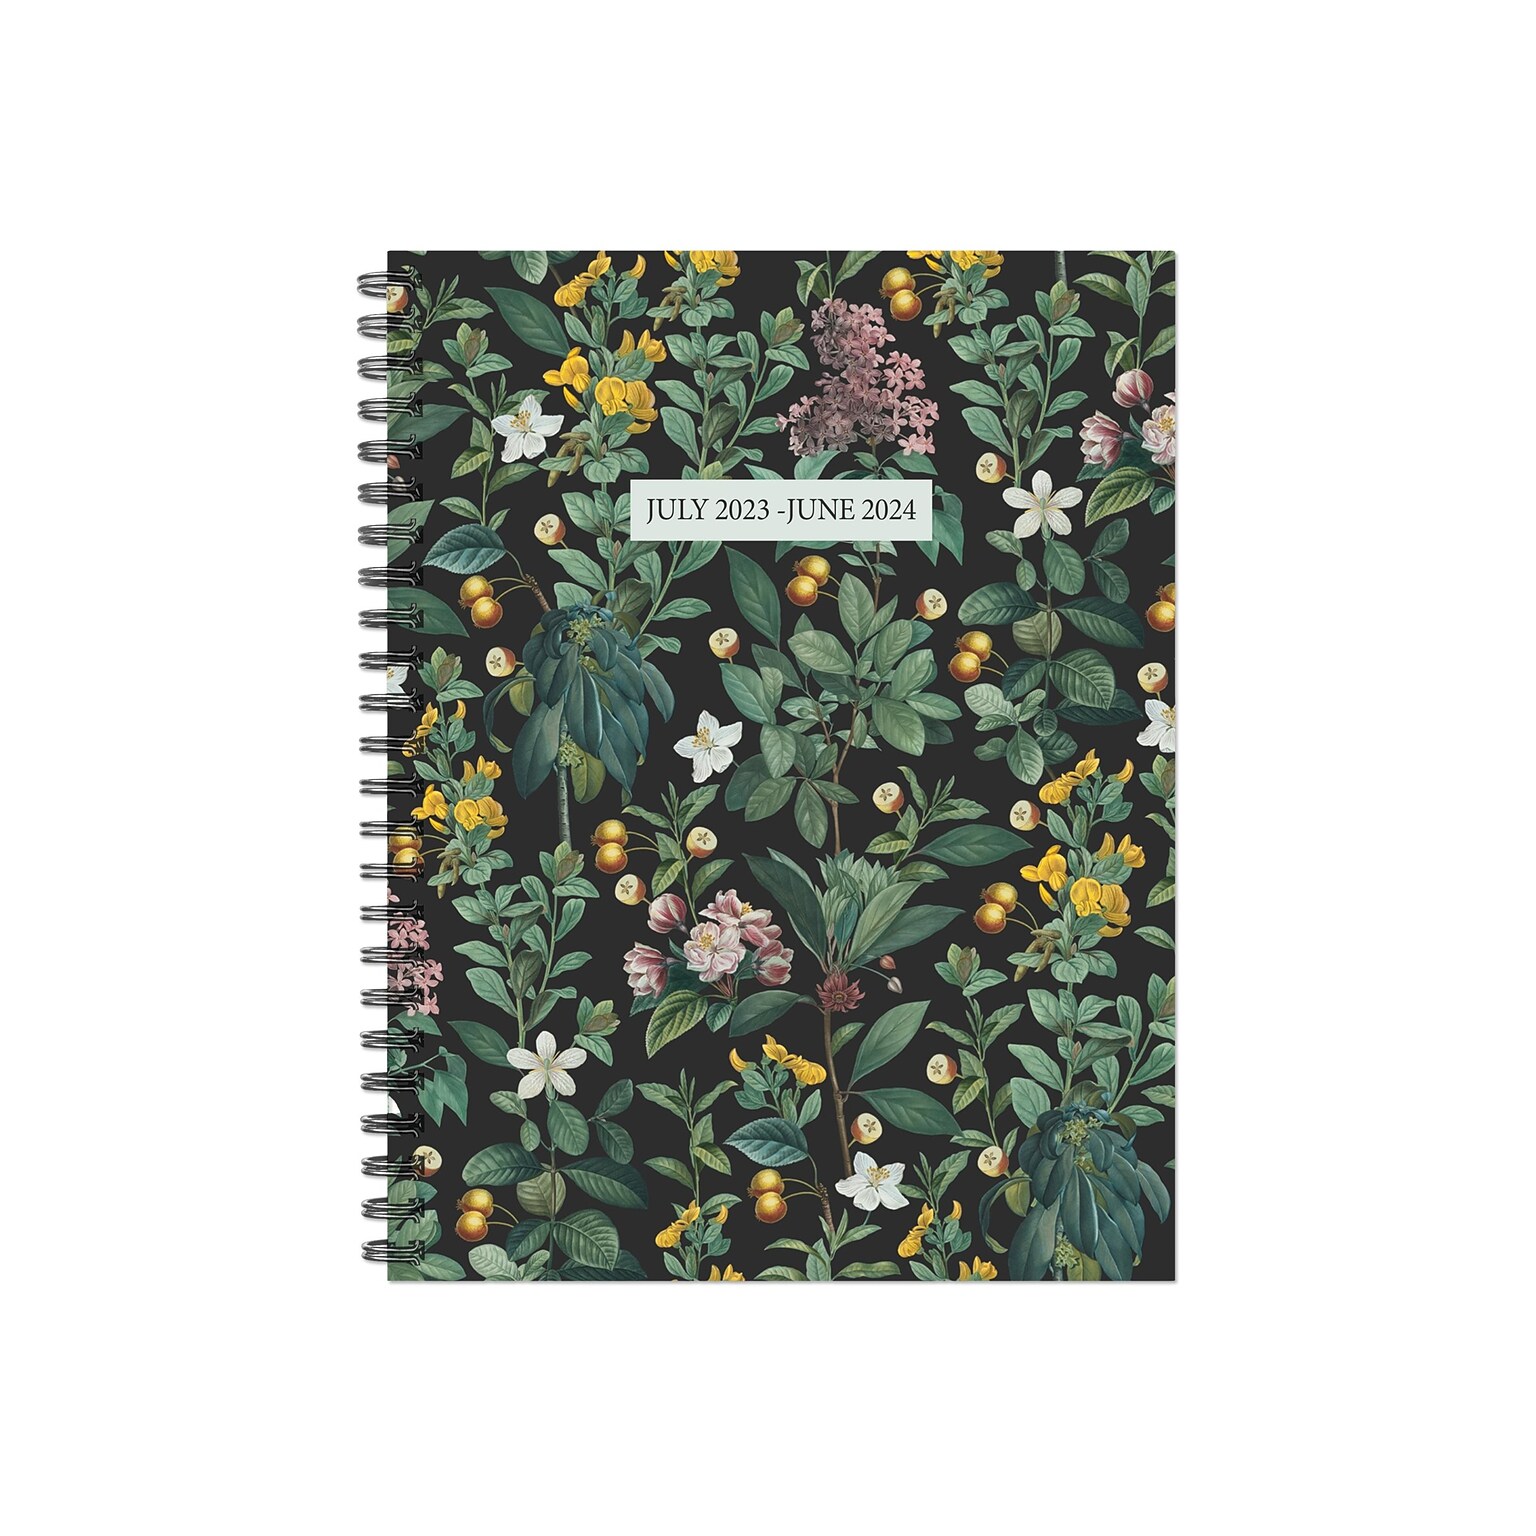 2023-2024 Willow Creek Botanical Nature 6.5 x 8.5 Academic Weekly & Monthly Planner, Paperboard Cover, Multicolor (38062)